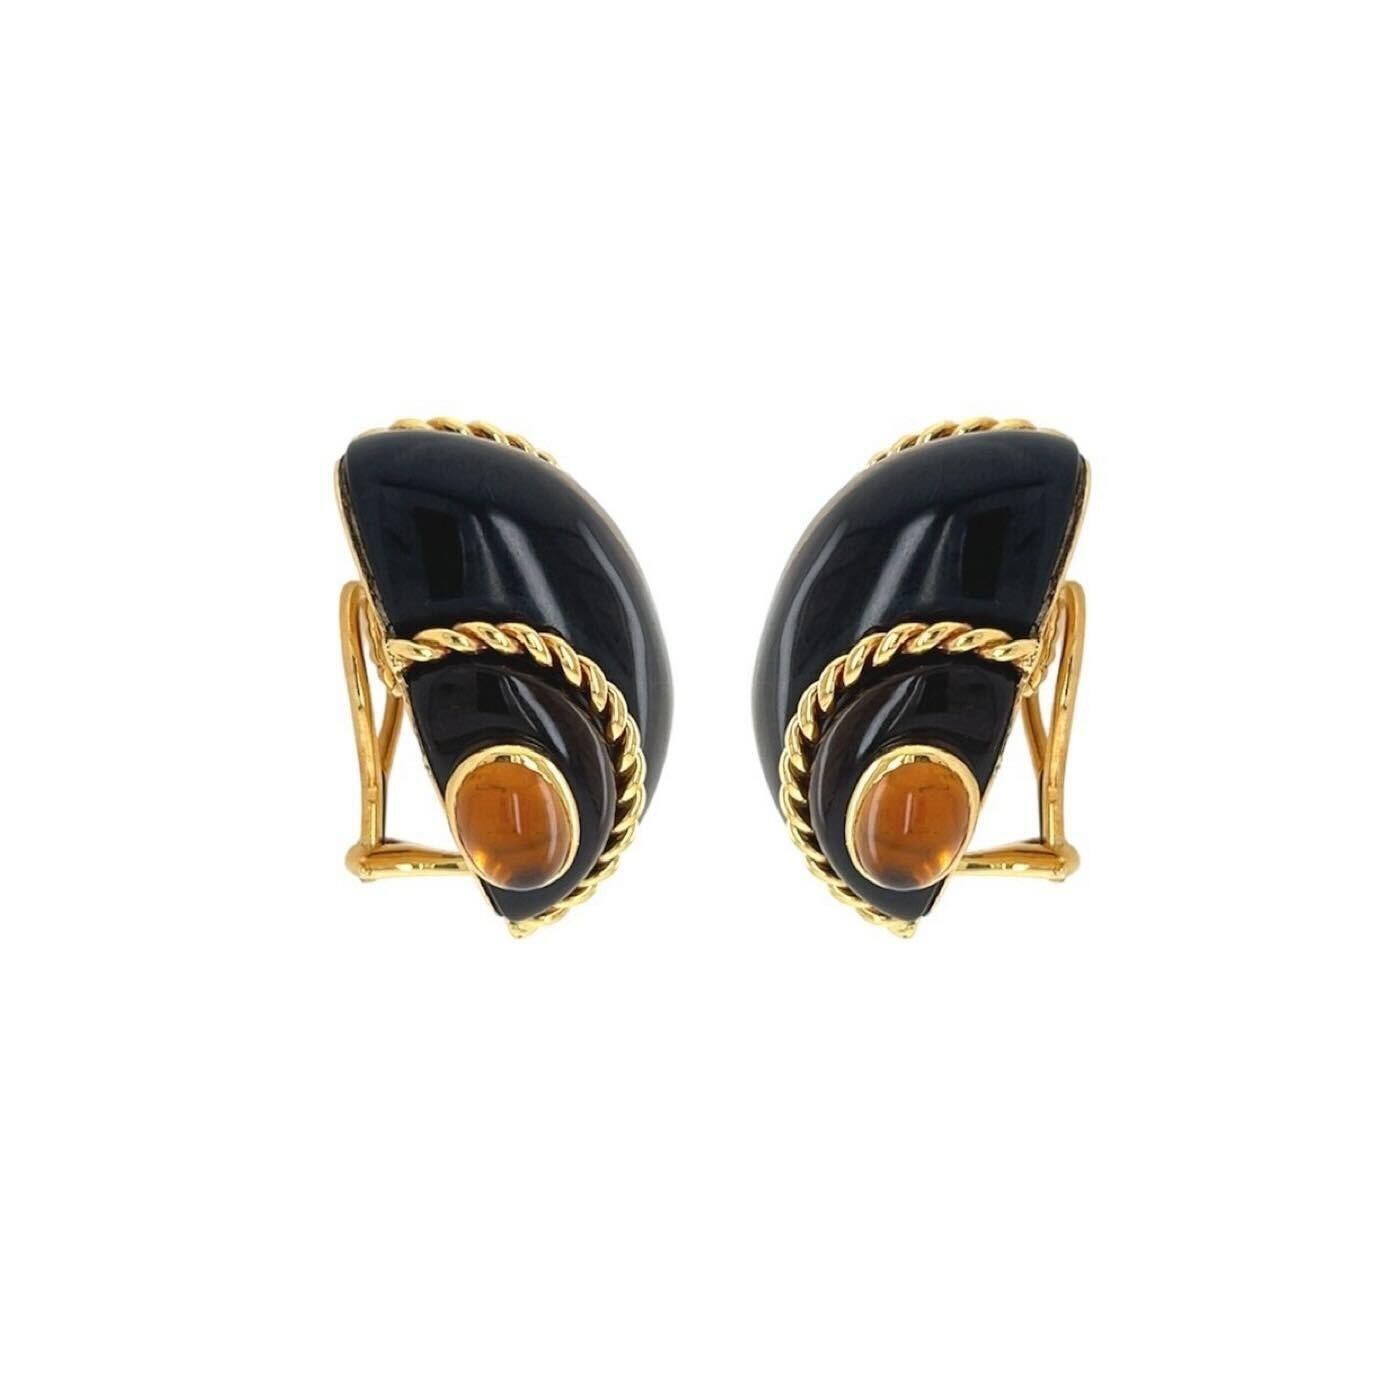 A pair of 18 karat yellow gold, tiger’s eye and citrine earclips, Verdura.  Each earclip designed as a turbo shell of tiger’s eye applied with ropetwist wire and completed by two (2) terminals of bezel set oval cabochon citrines measuring